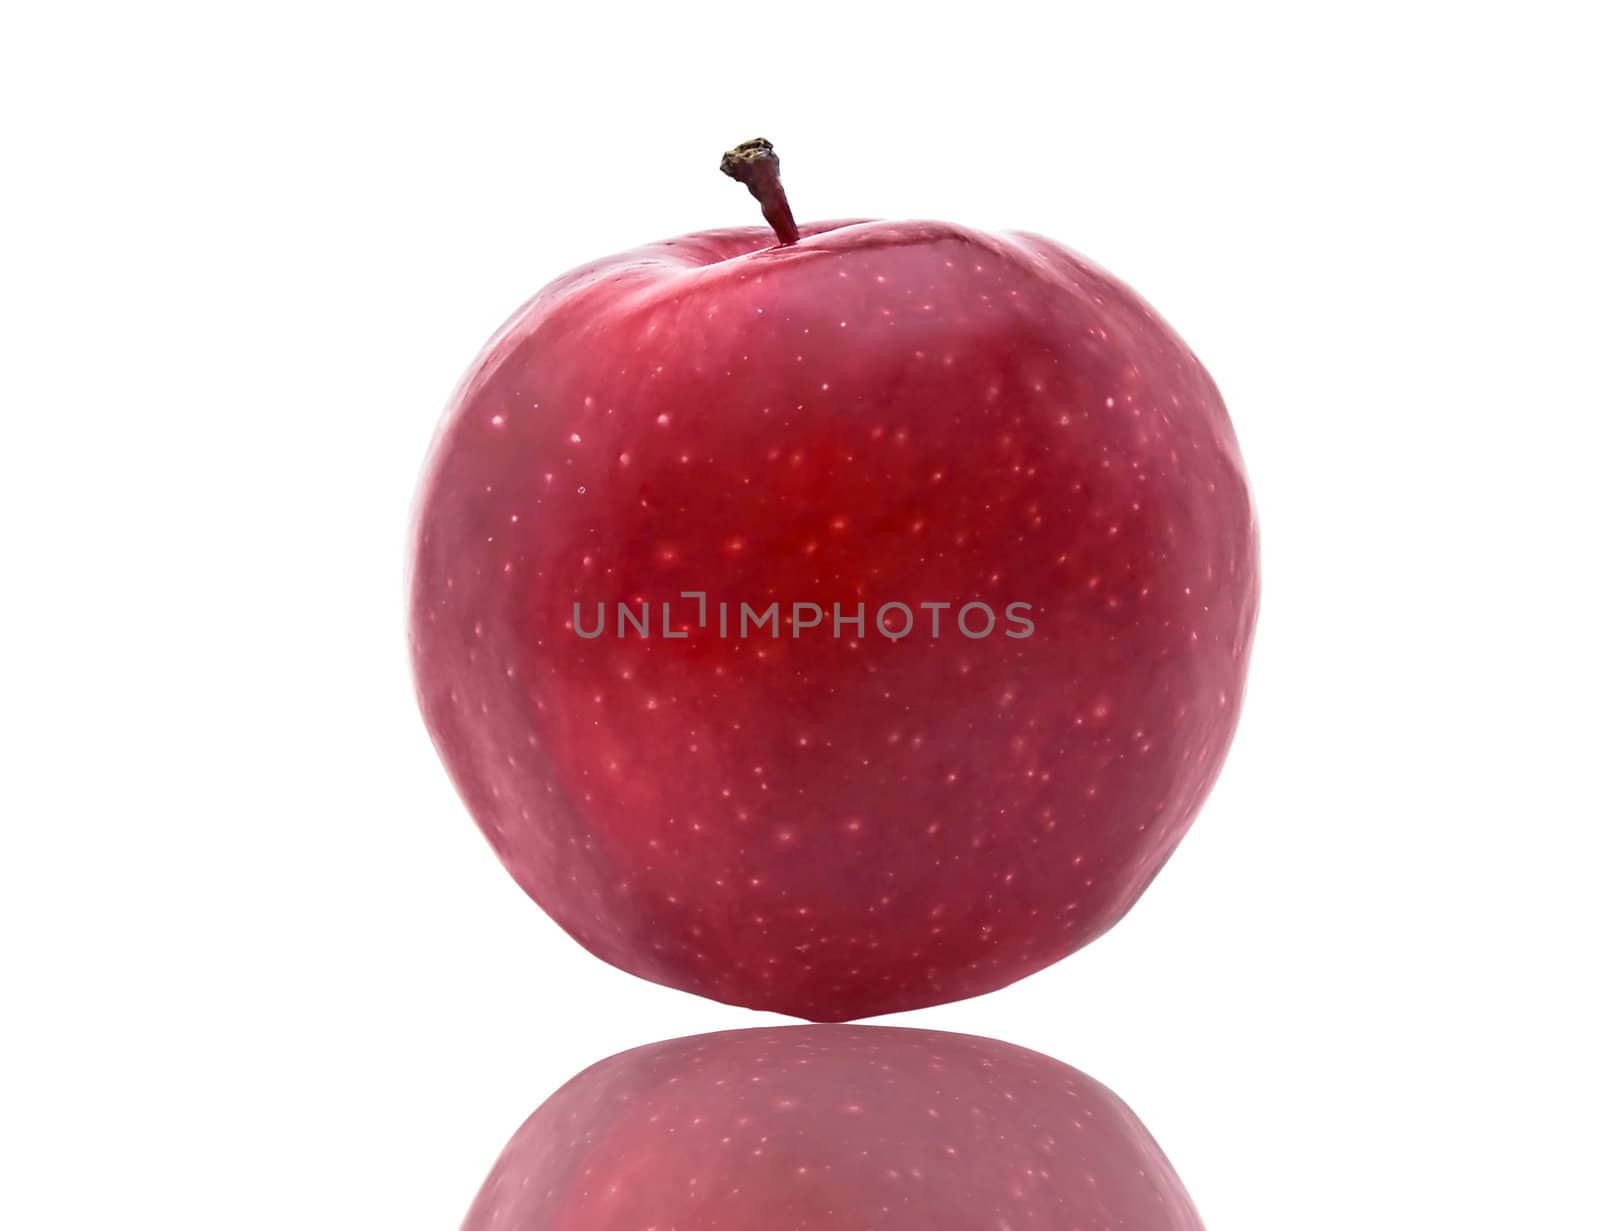 Dark-red apple. Isolated on white background by ozaiachin